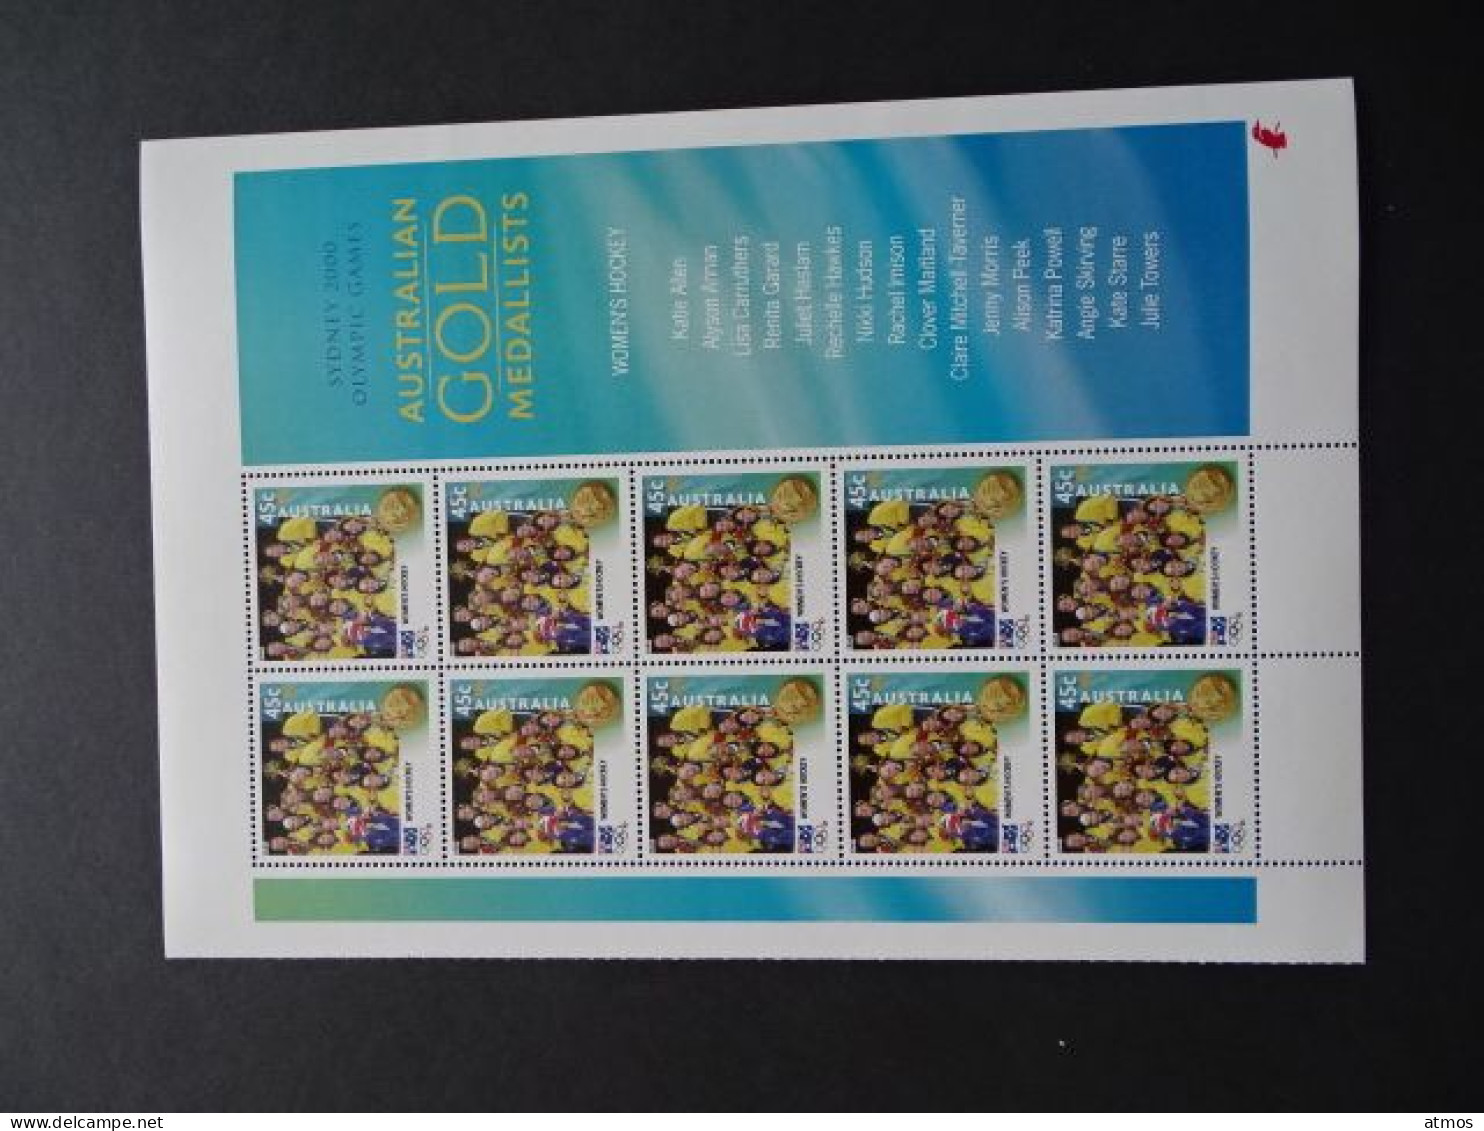 Australia MNH Michel Nr 1986 Sheet Of 10 From 2000 ACT - Mint Stamps